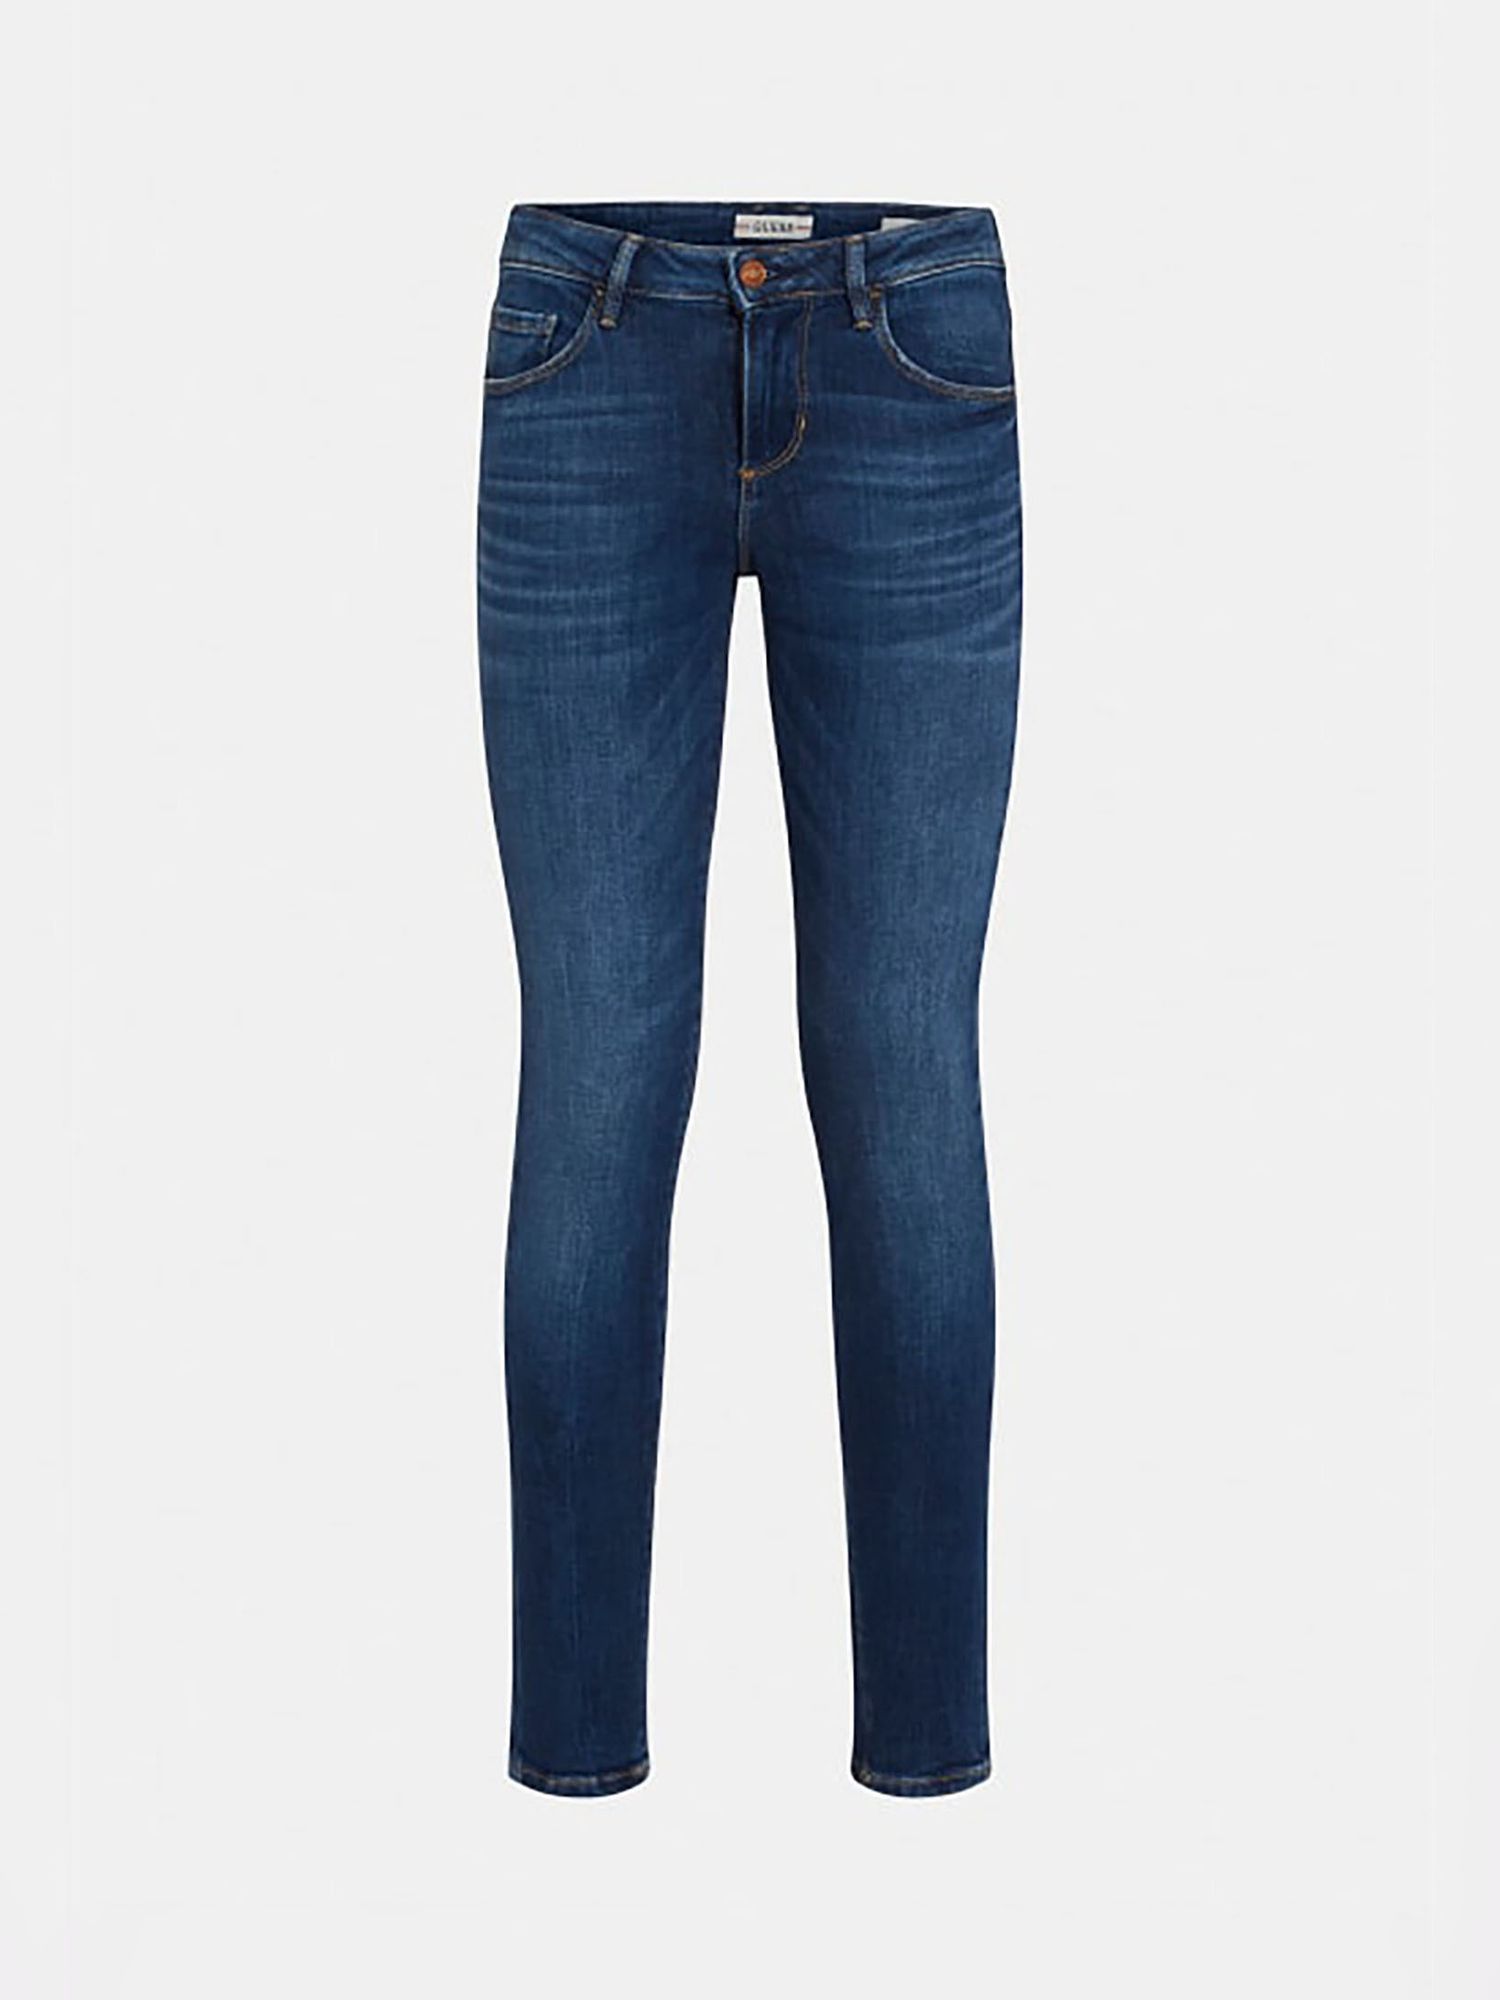 GUESS Annette Skinny Fit Denim Jeans, Carrie Mid, W29/L30